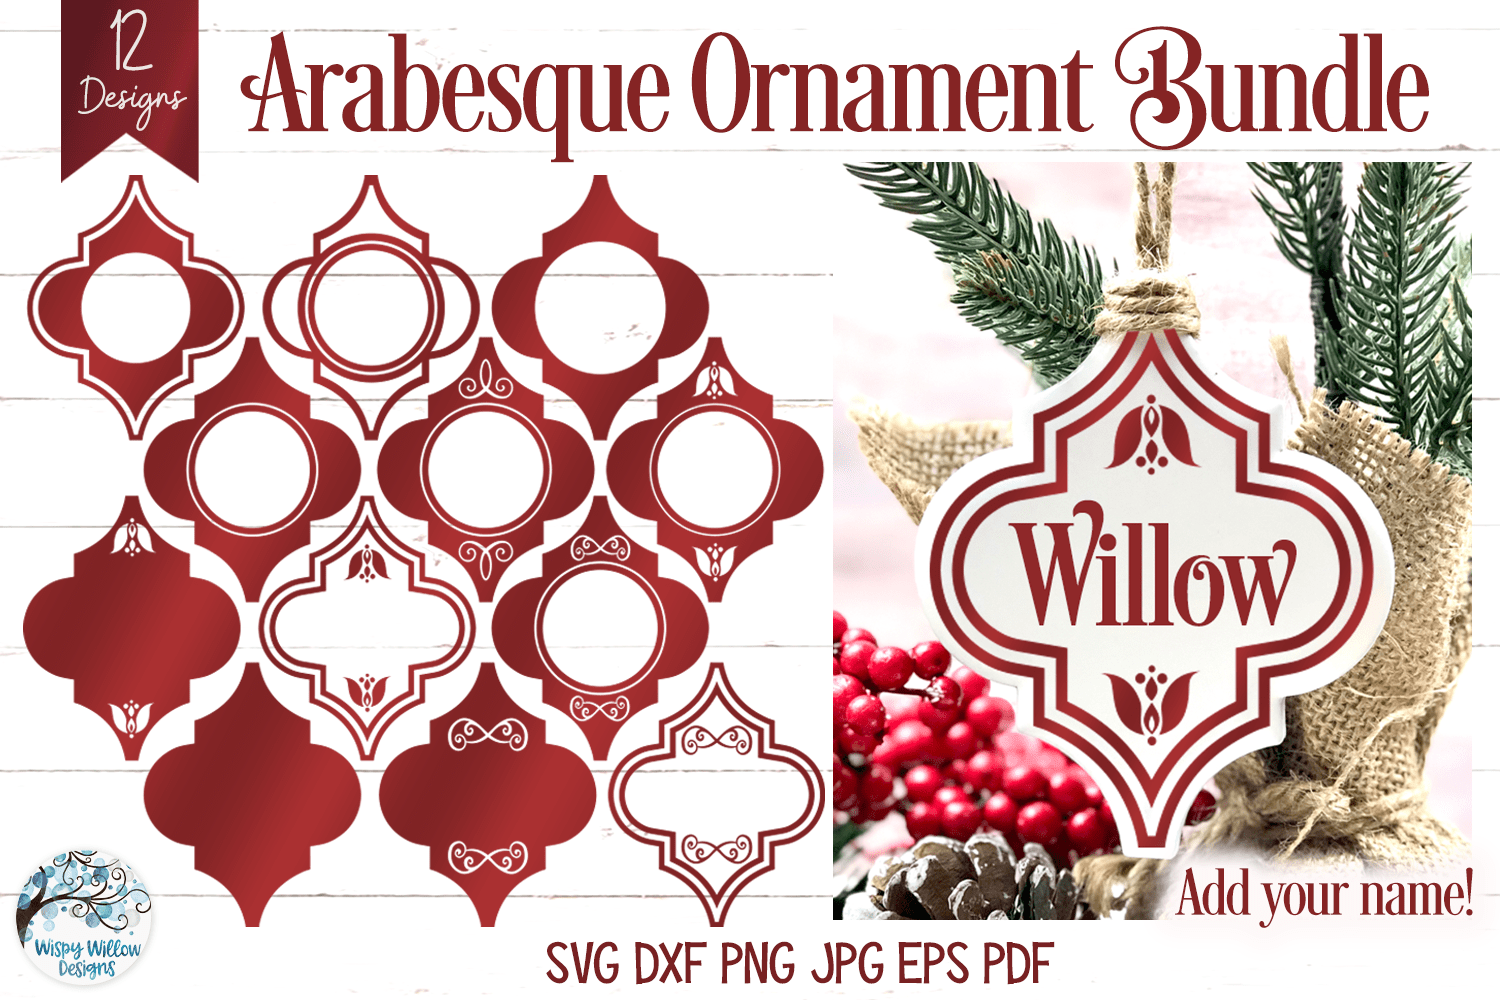 Arabesque Ornament SVG Bundle - Frames for Names and Monograms Vol 2 Wispy Willow Designs Company